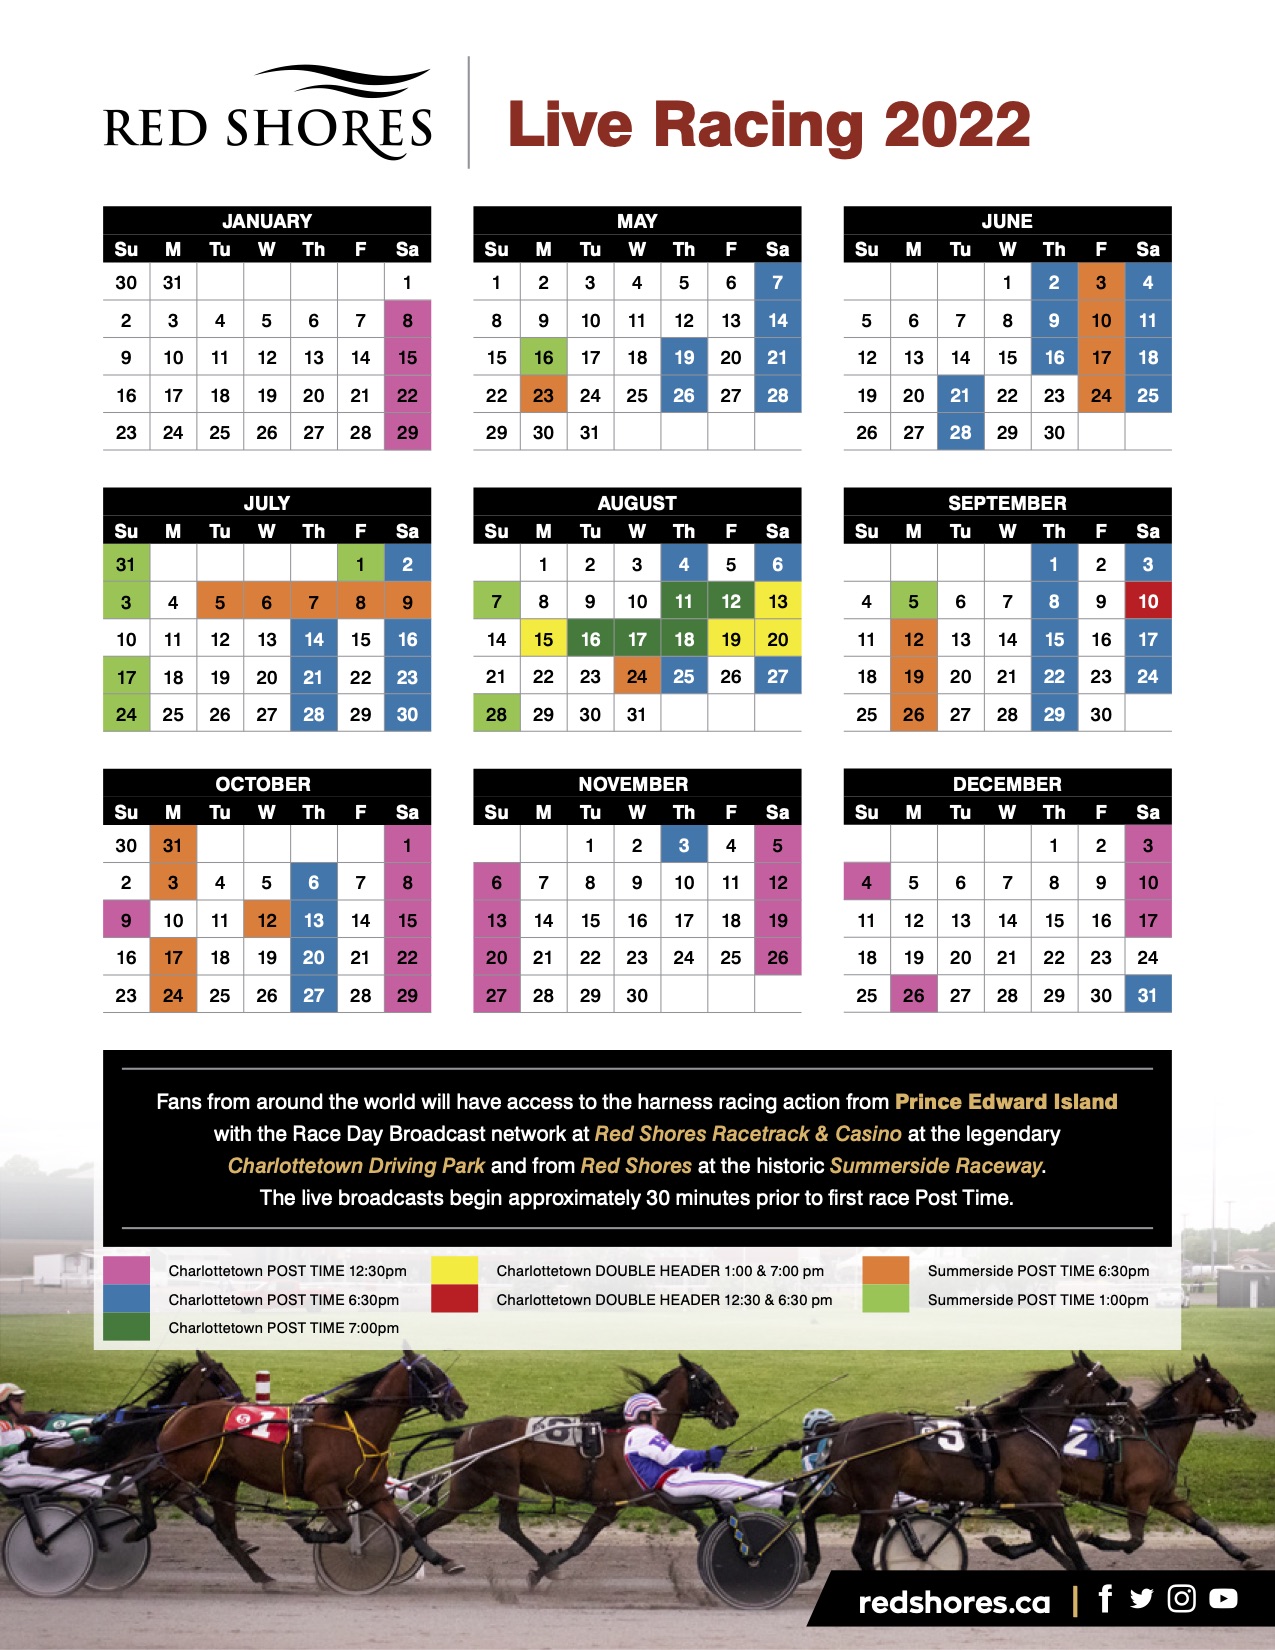 Monthly Racing Calendar for Red Shores 2022 Harness Racing PEI